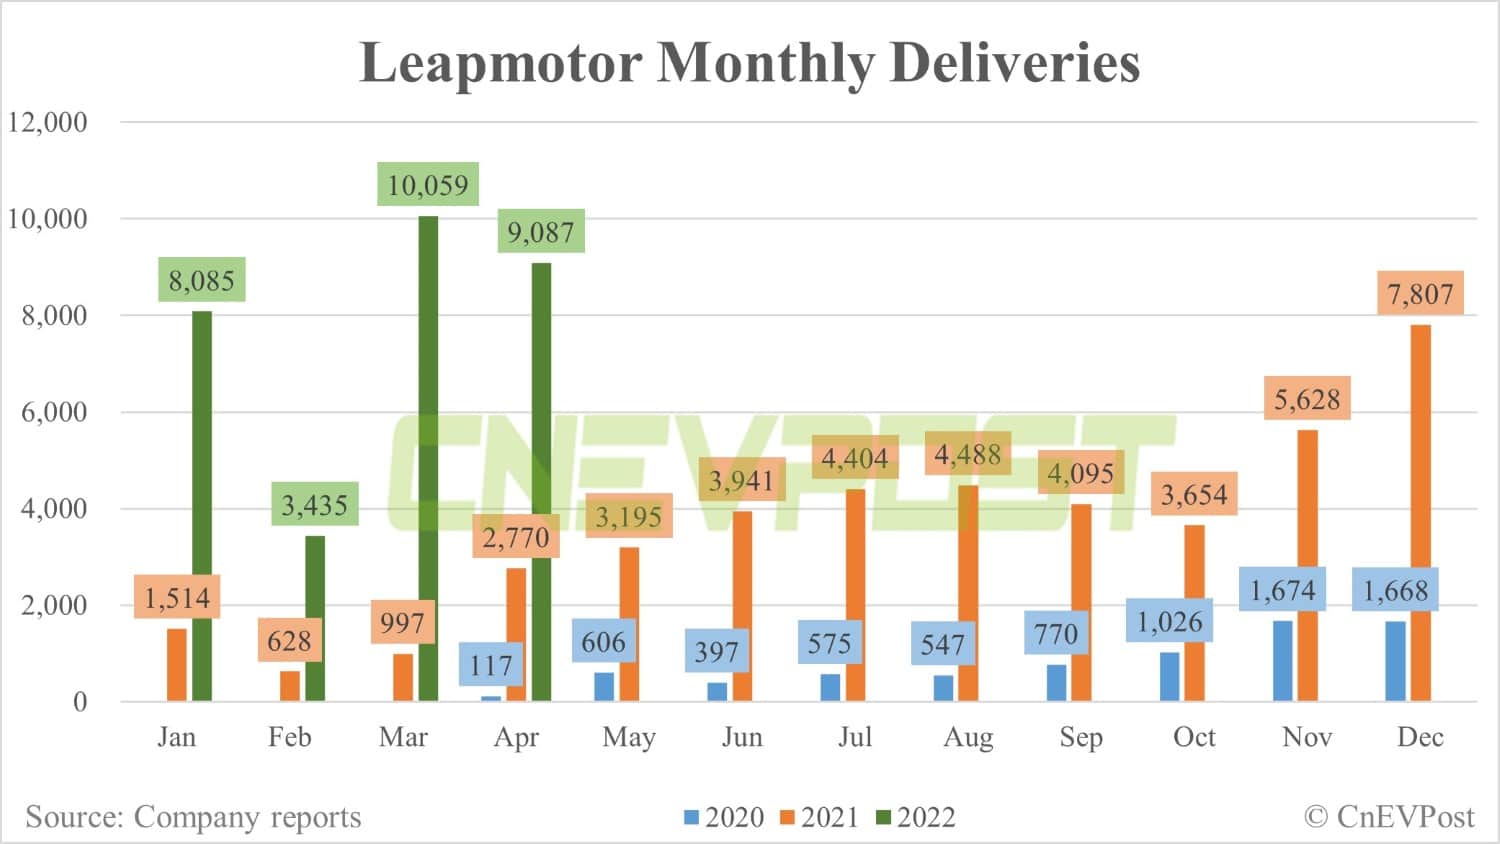 Leapmotor delivers 9,087 vehicles in April, down 10% from March-CnEVPost